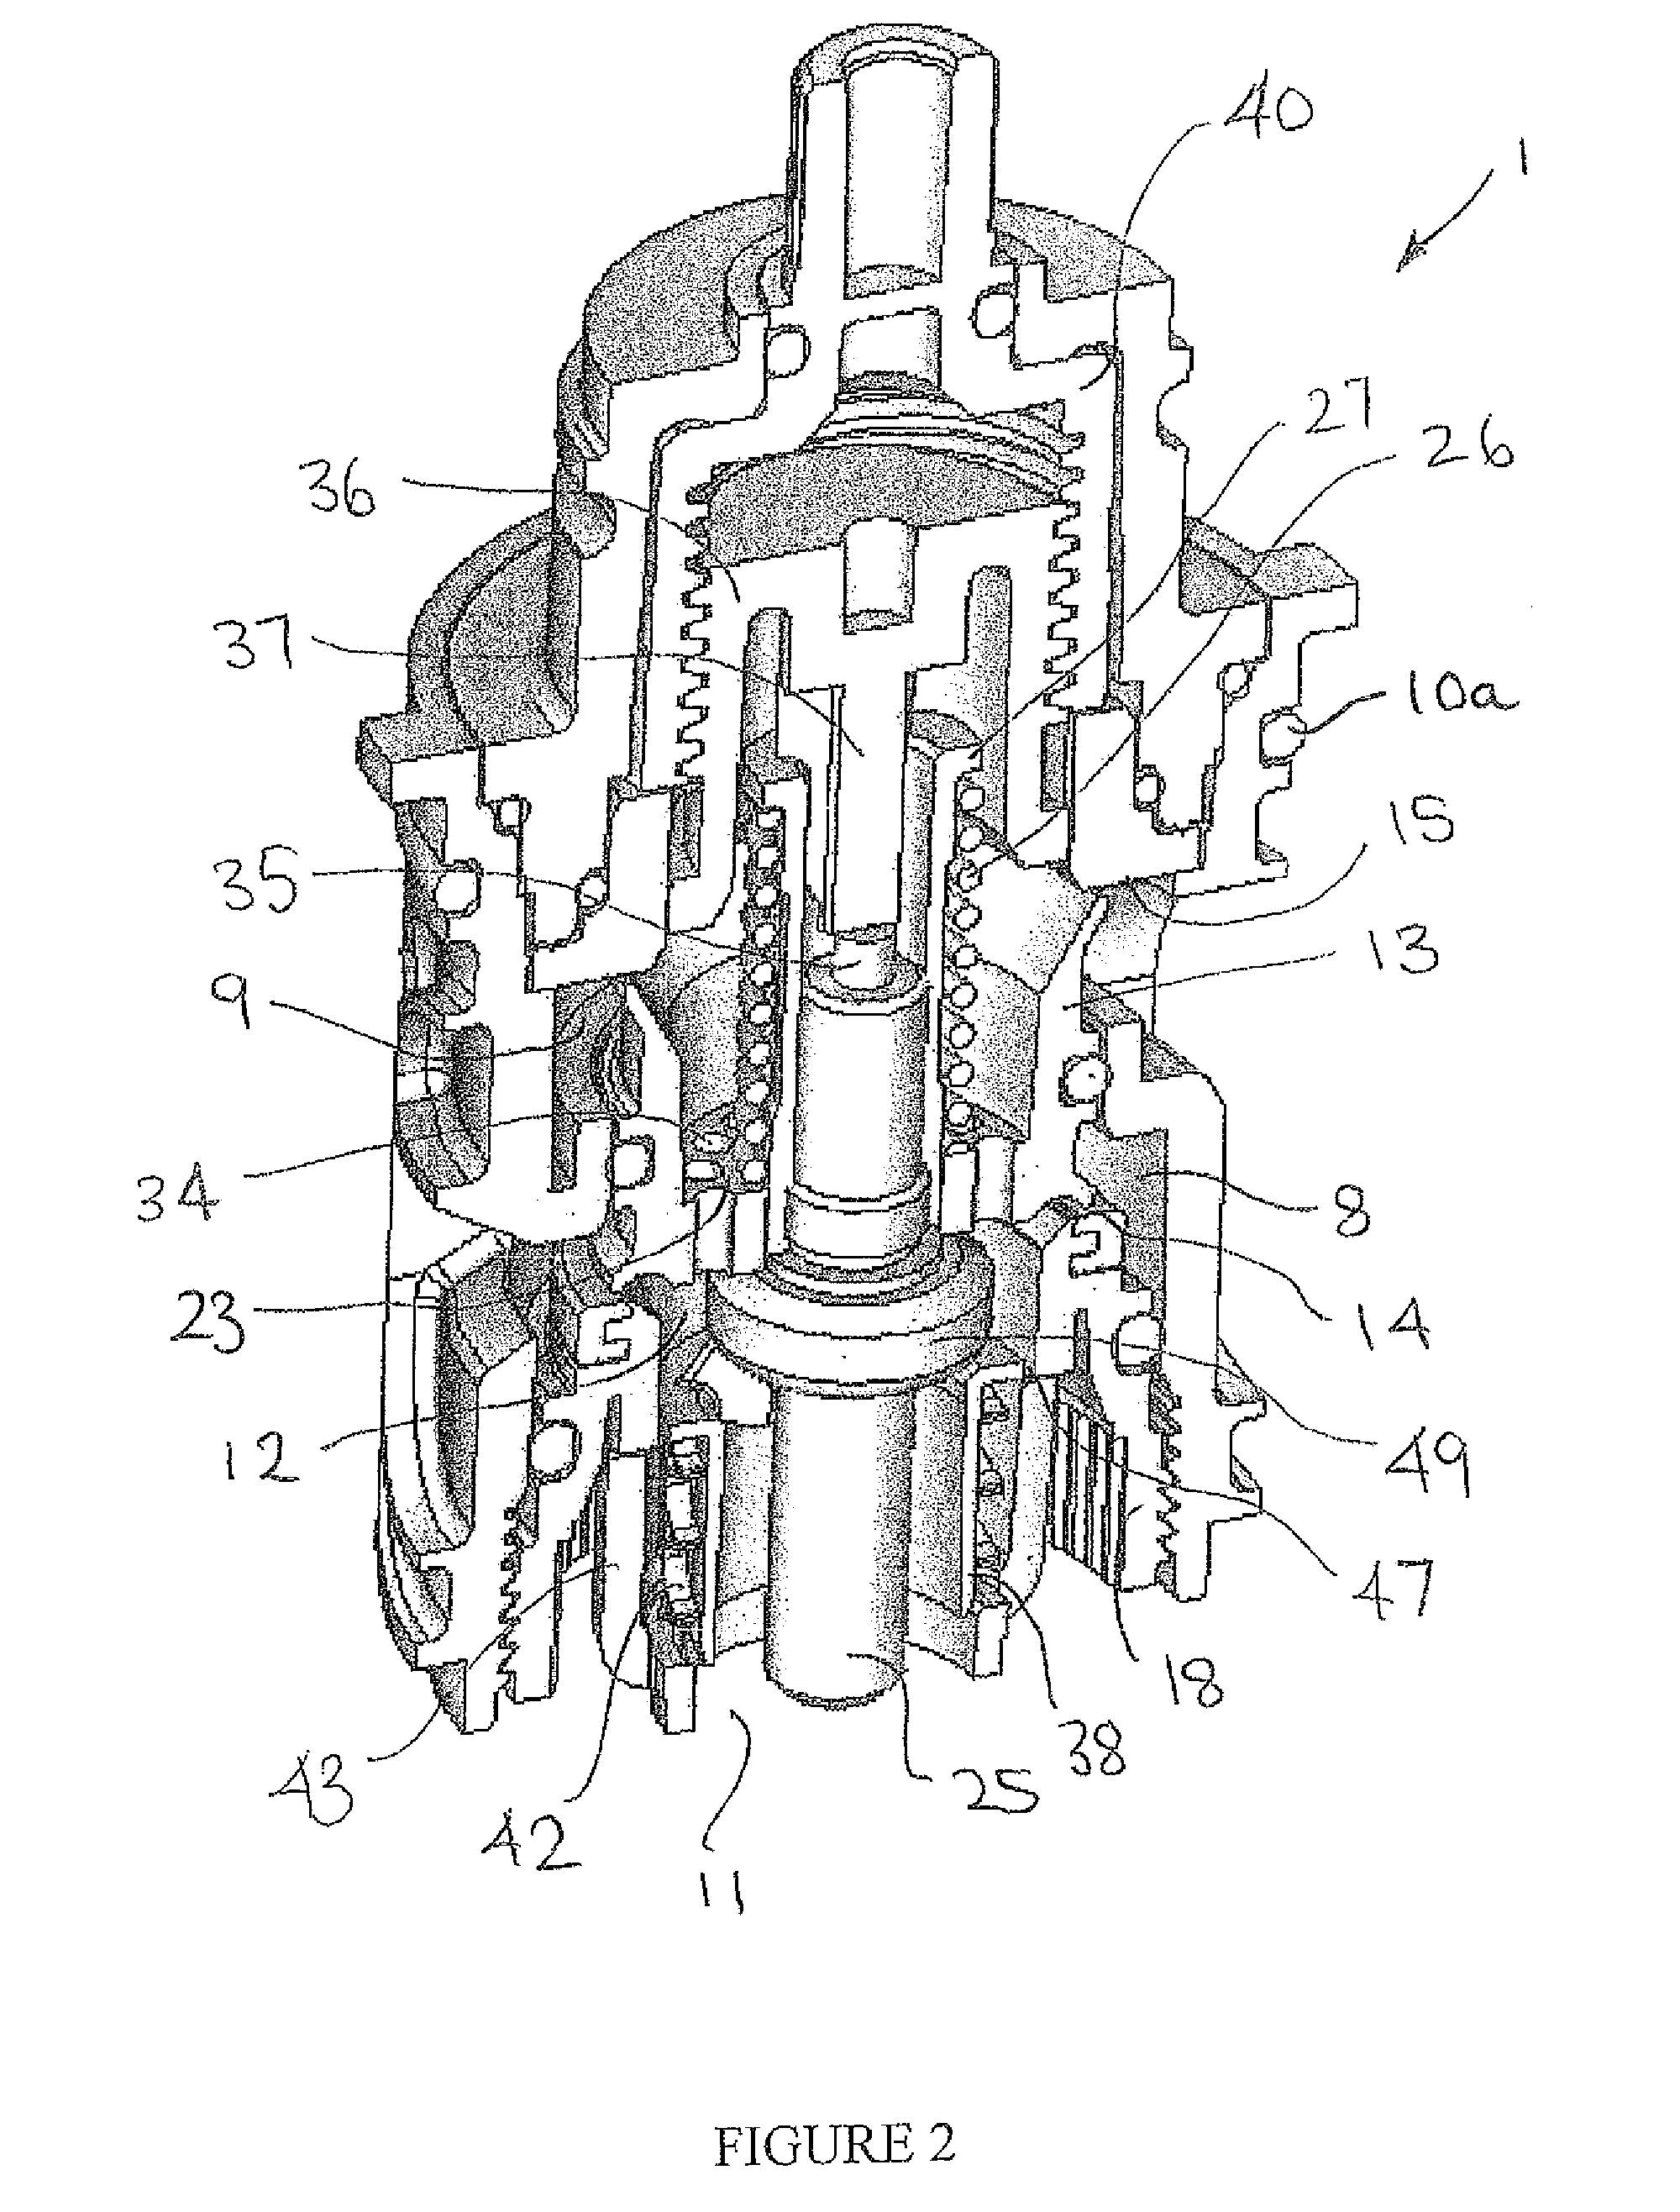 Thermostatic mixing valves